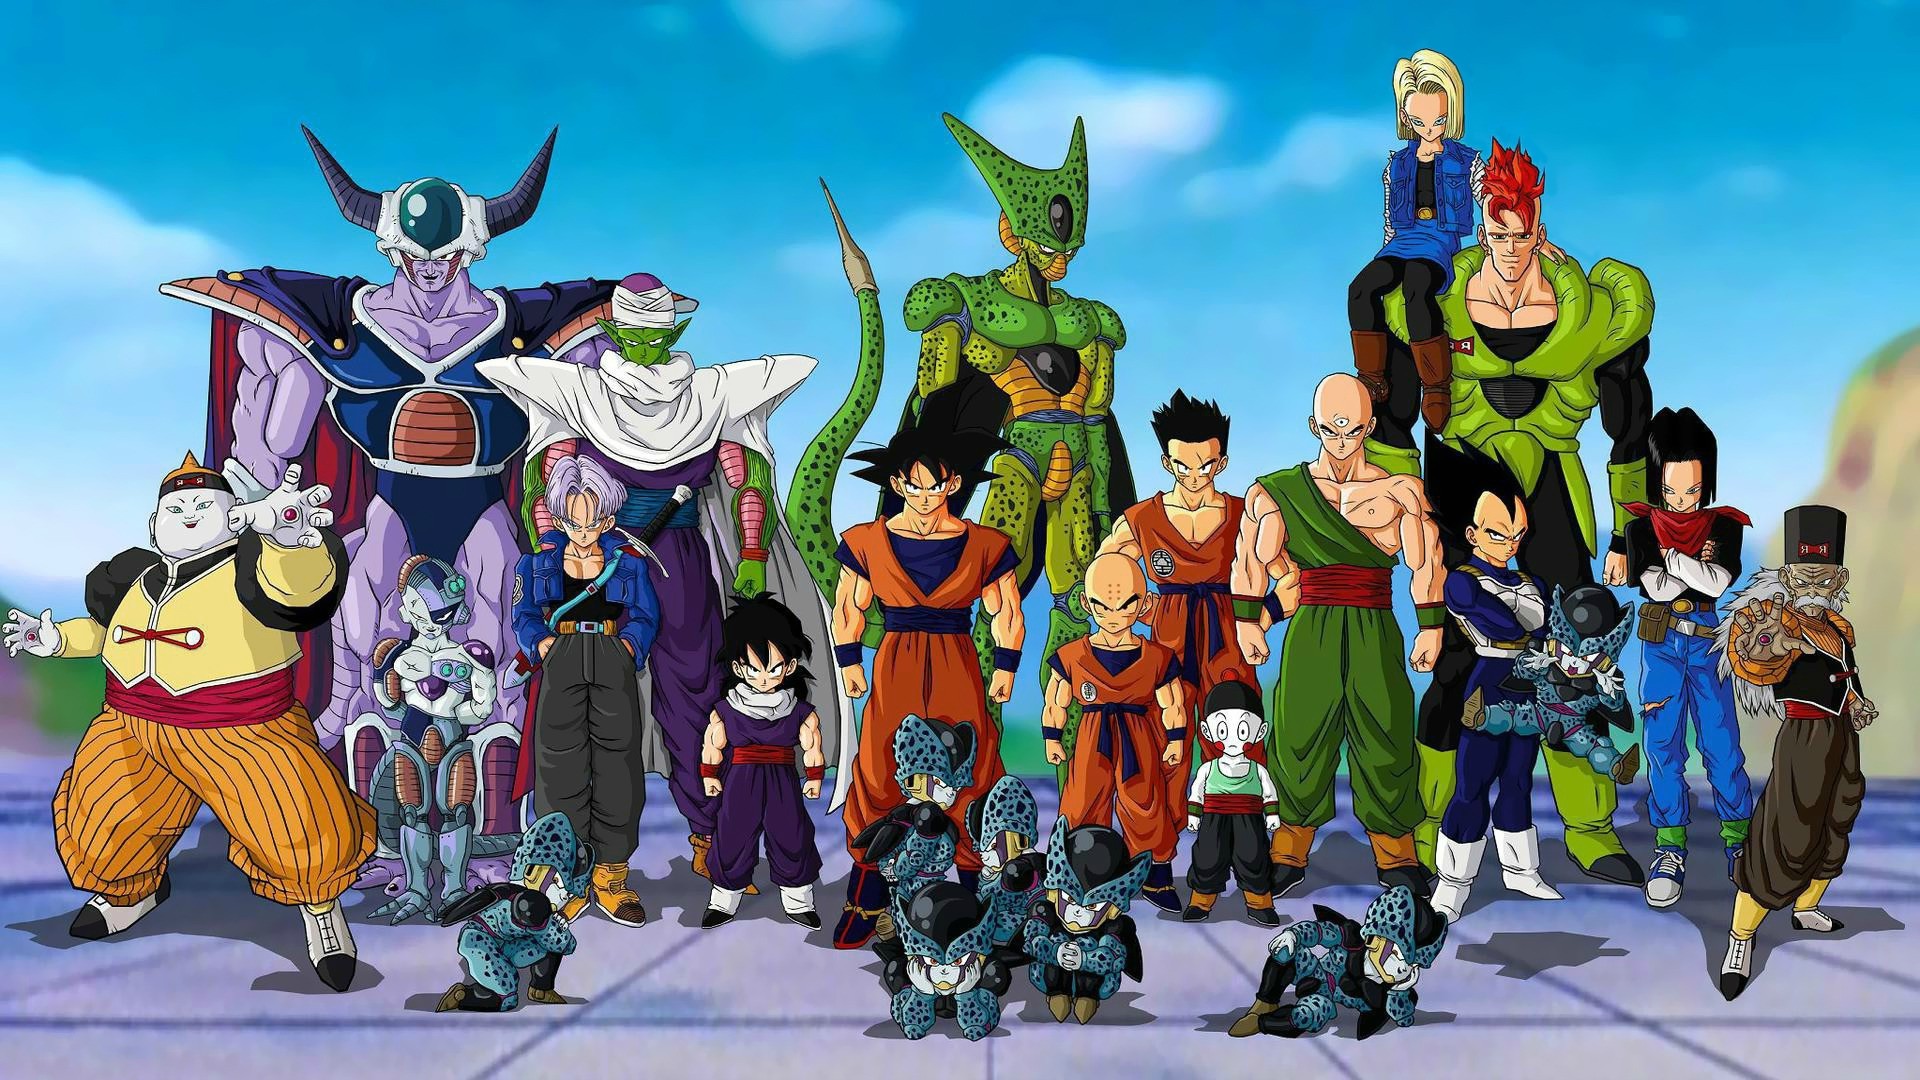 Dragon Ball Son Goku Cell Character Trunks Character Vegeta Gohan Krillin Android 17 Android 18 Tien 1920x1080